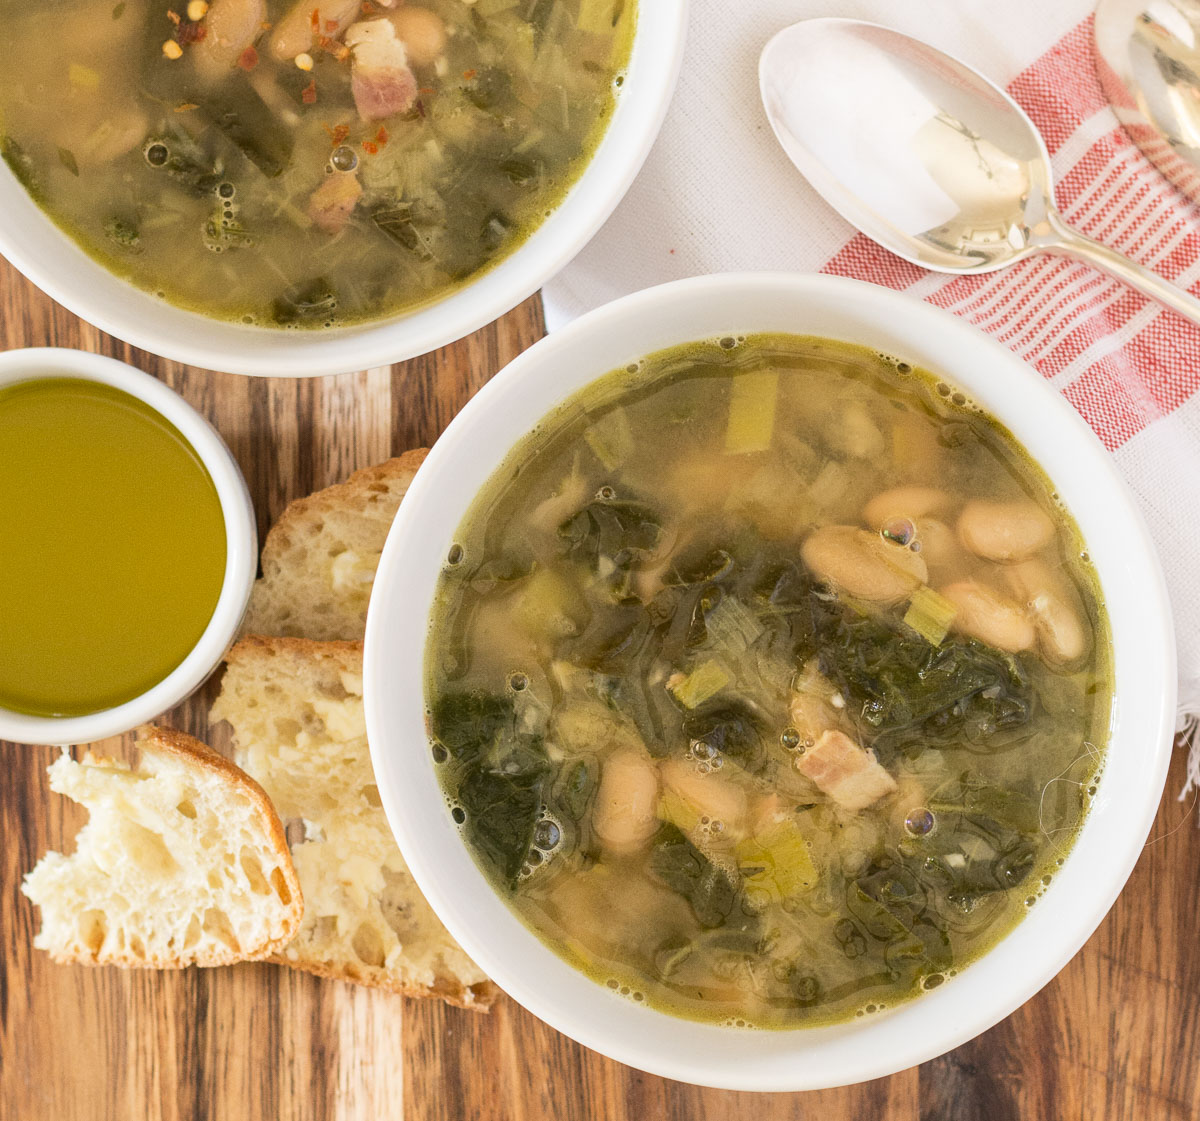 White bean swiss chard soup with leeks and bacon. A hearty, warming soup that chases away the winter blahs no matter how miserable it is out.